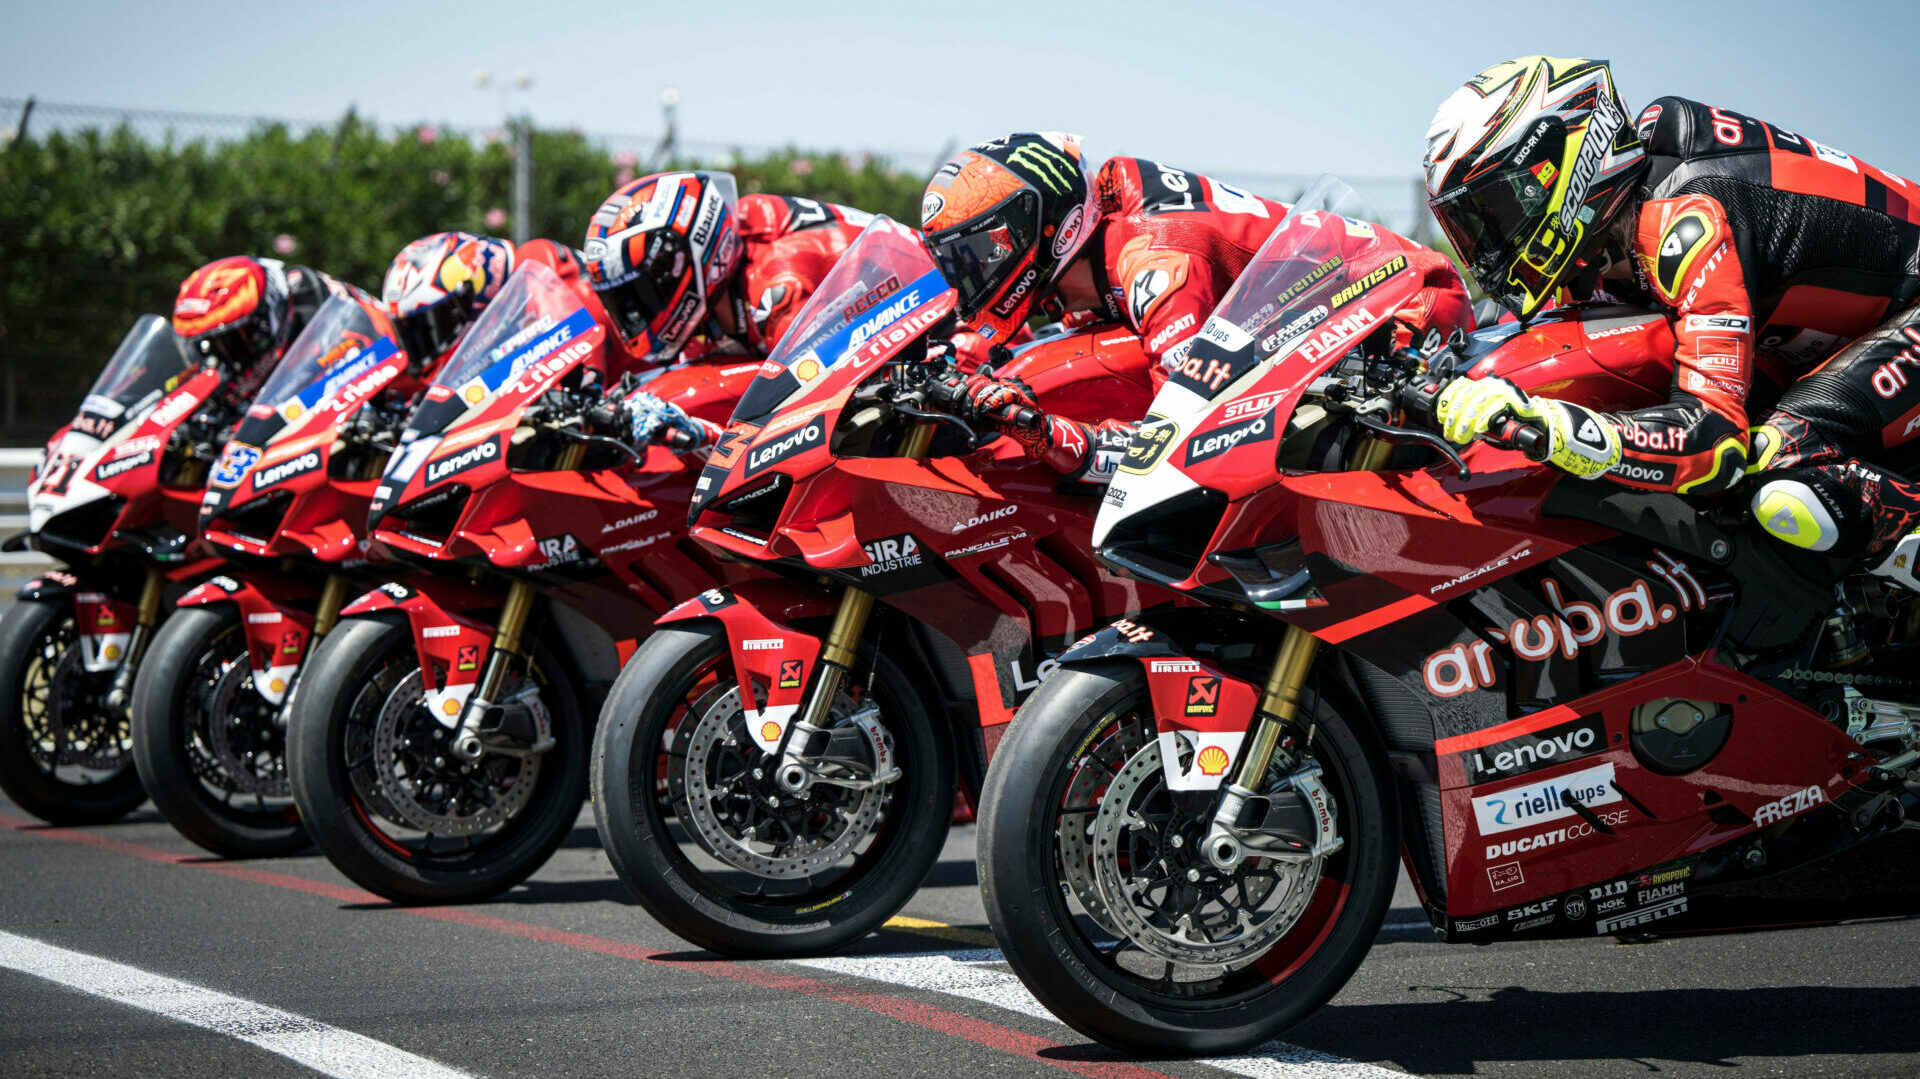 (From front) Alvaro Bautista, Francesco Bagnaia, Michele Pirro, Jack Miller, and Michael Rinaldi on their personalized Race of Champions Ducati Panigale V4 S racebikes. Photo courtesy Ducati,